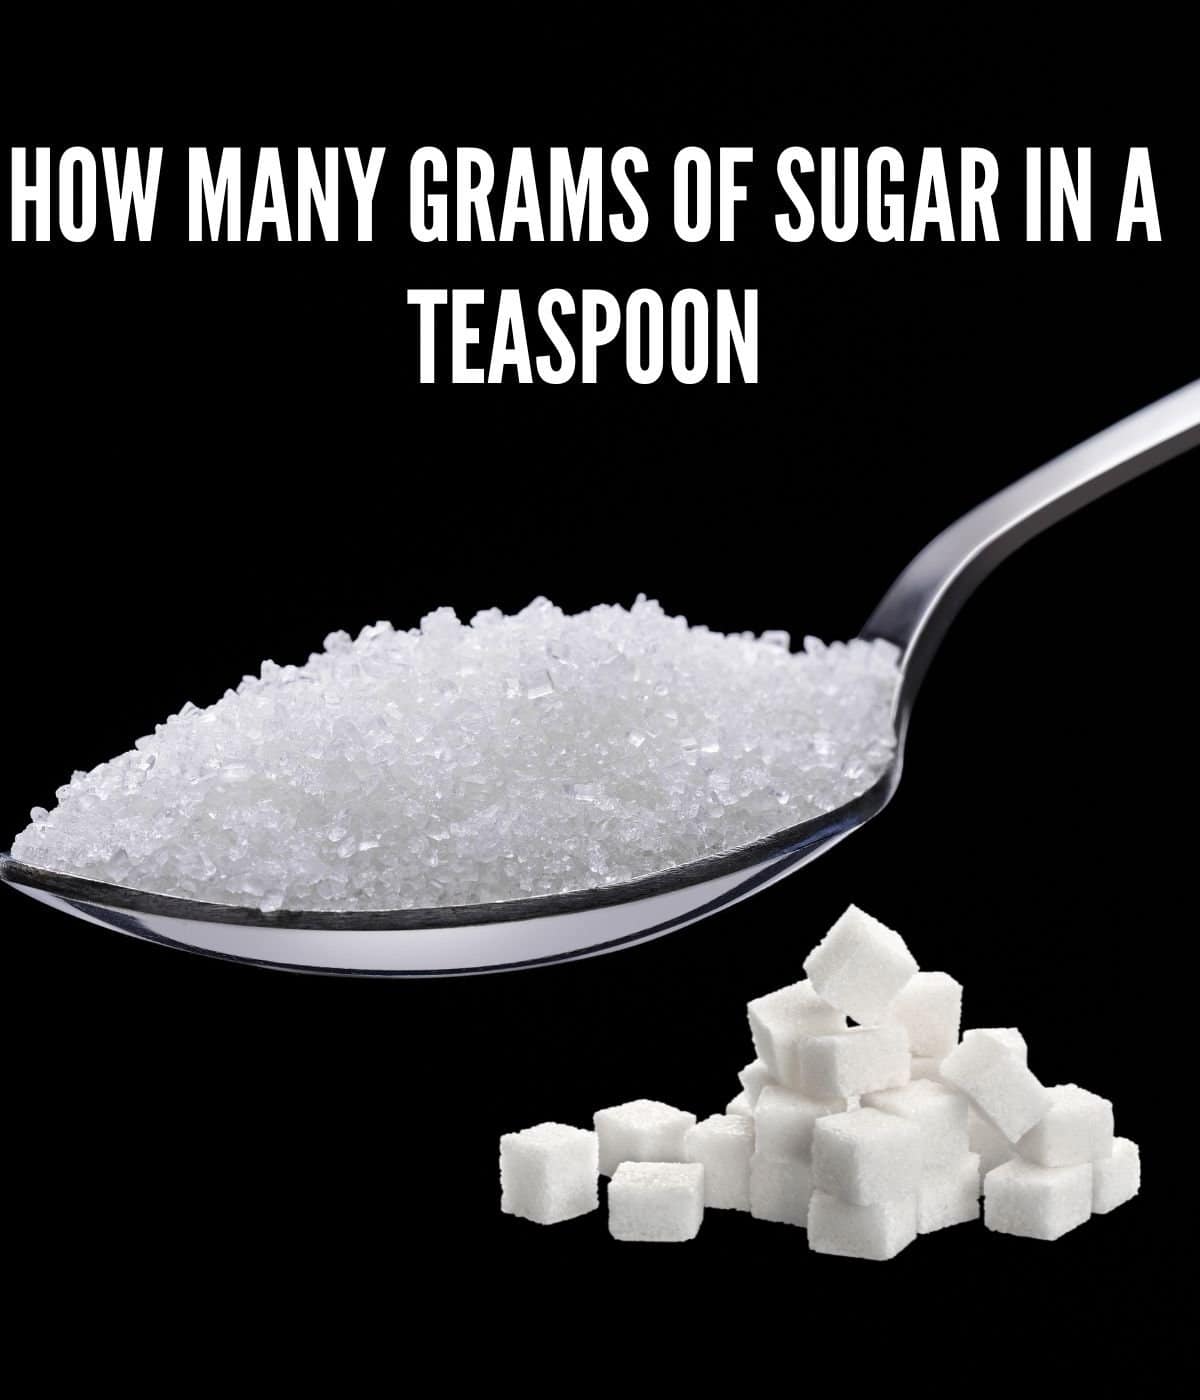 sugar in a teaspoon with sugar crystals at the bottom of the image